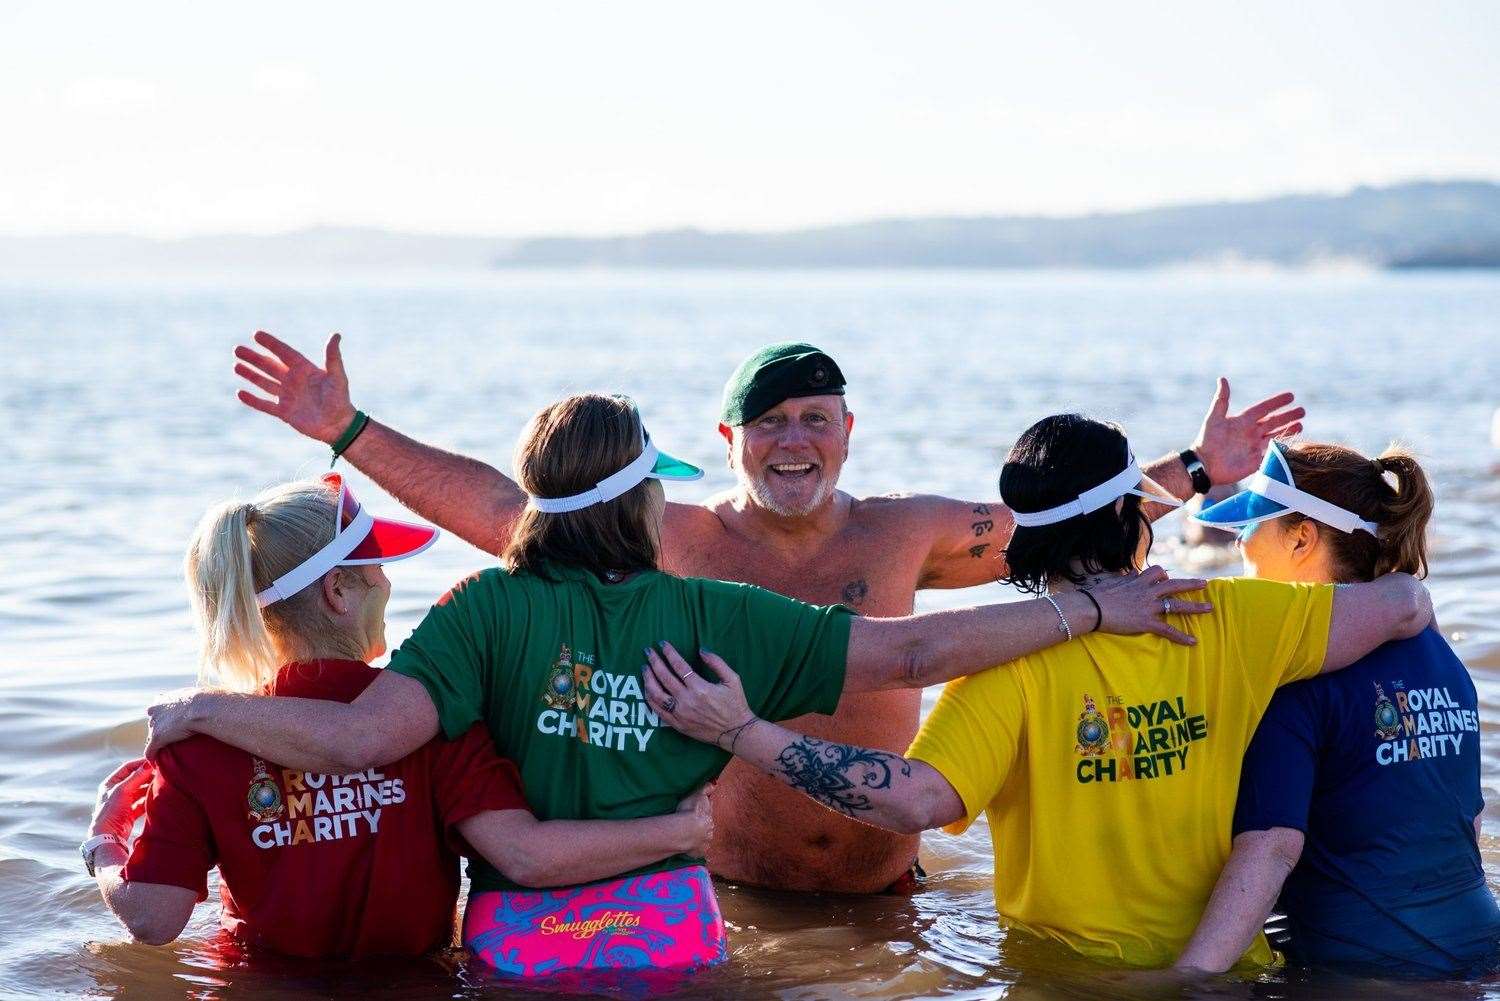 Tim was joined by some 30 supporters, including former commando colleagues, at his Exmouth dip. Picture: Dotty Creative